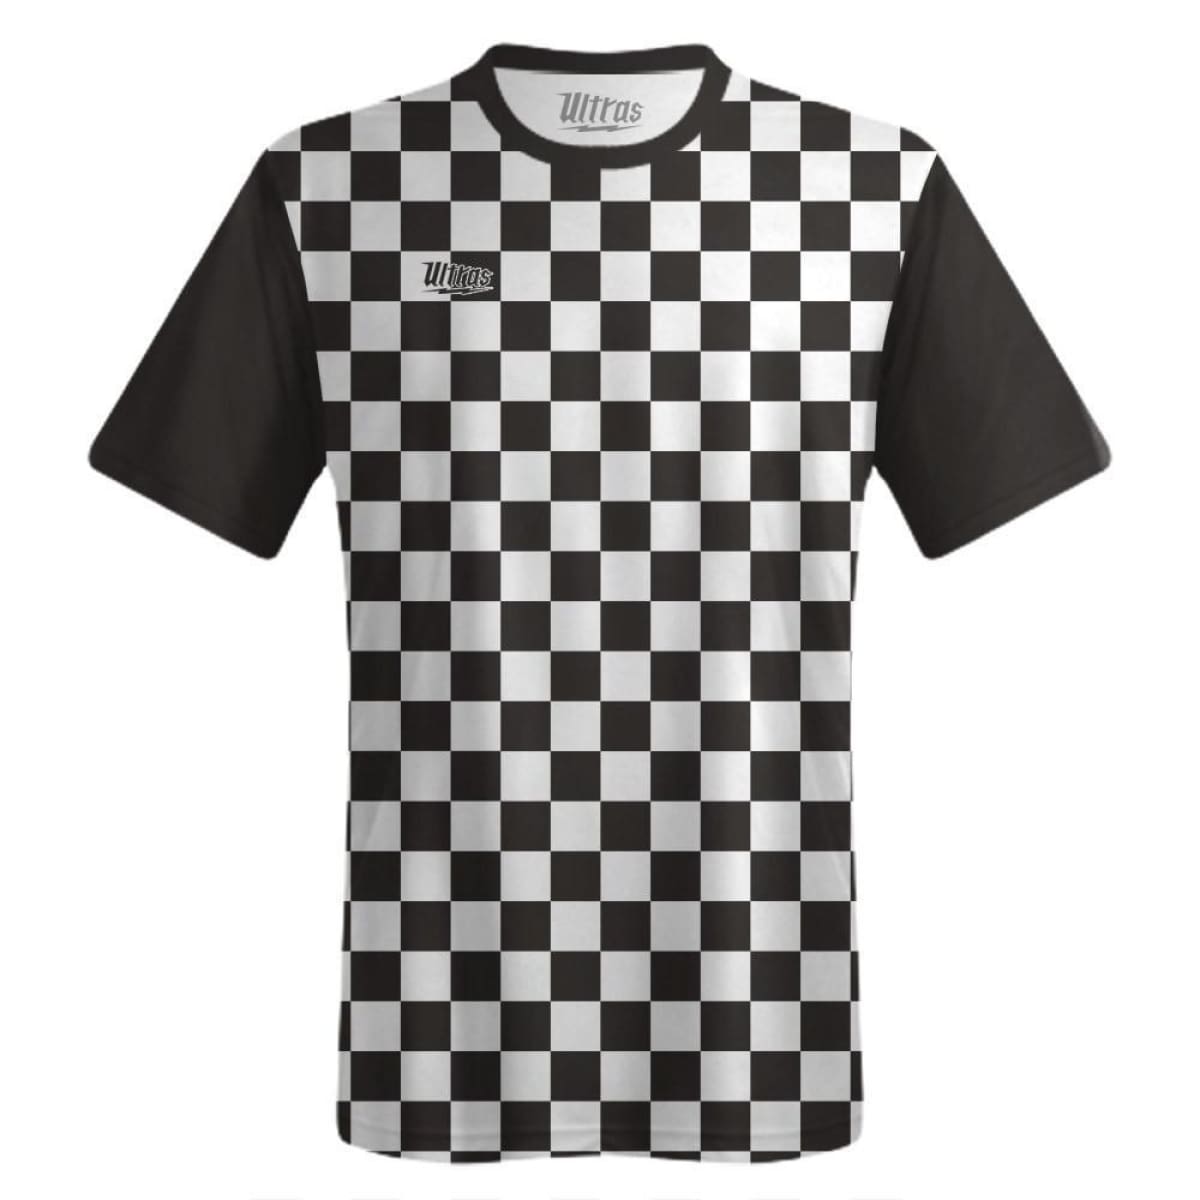 black and white soccer jersey